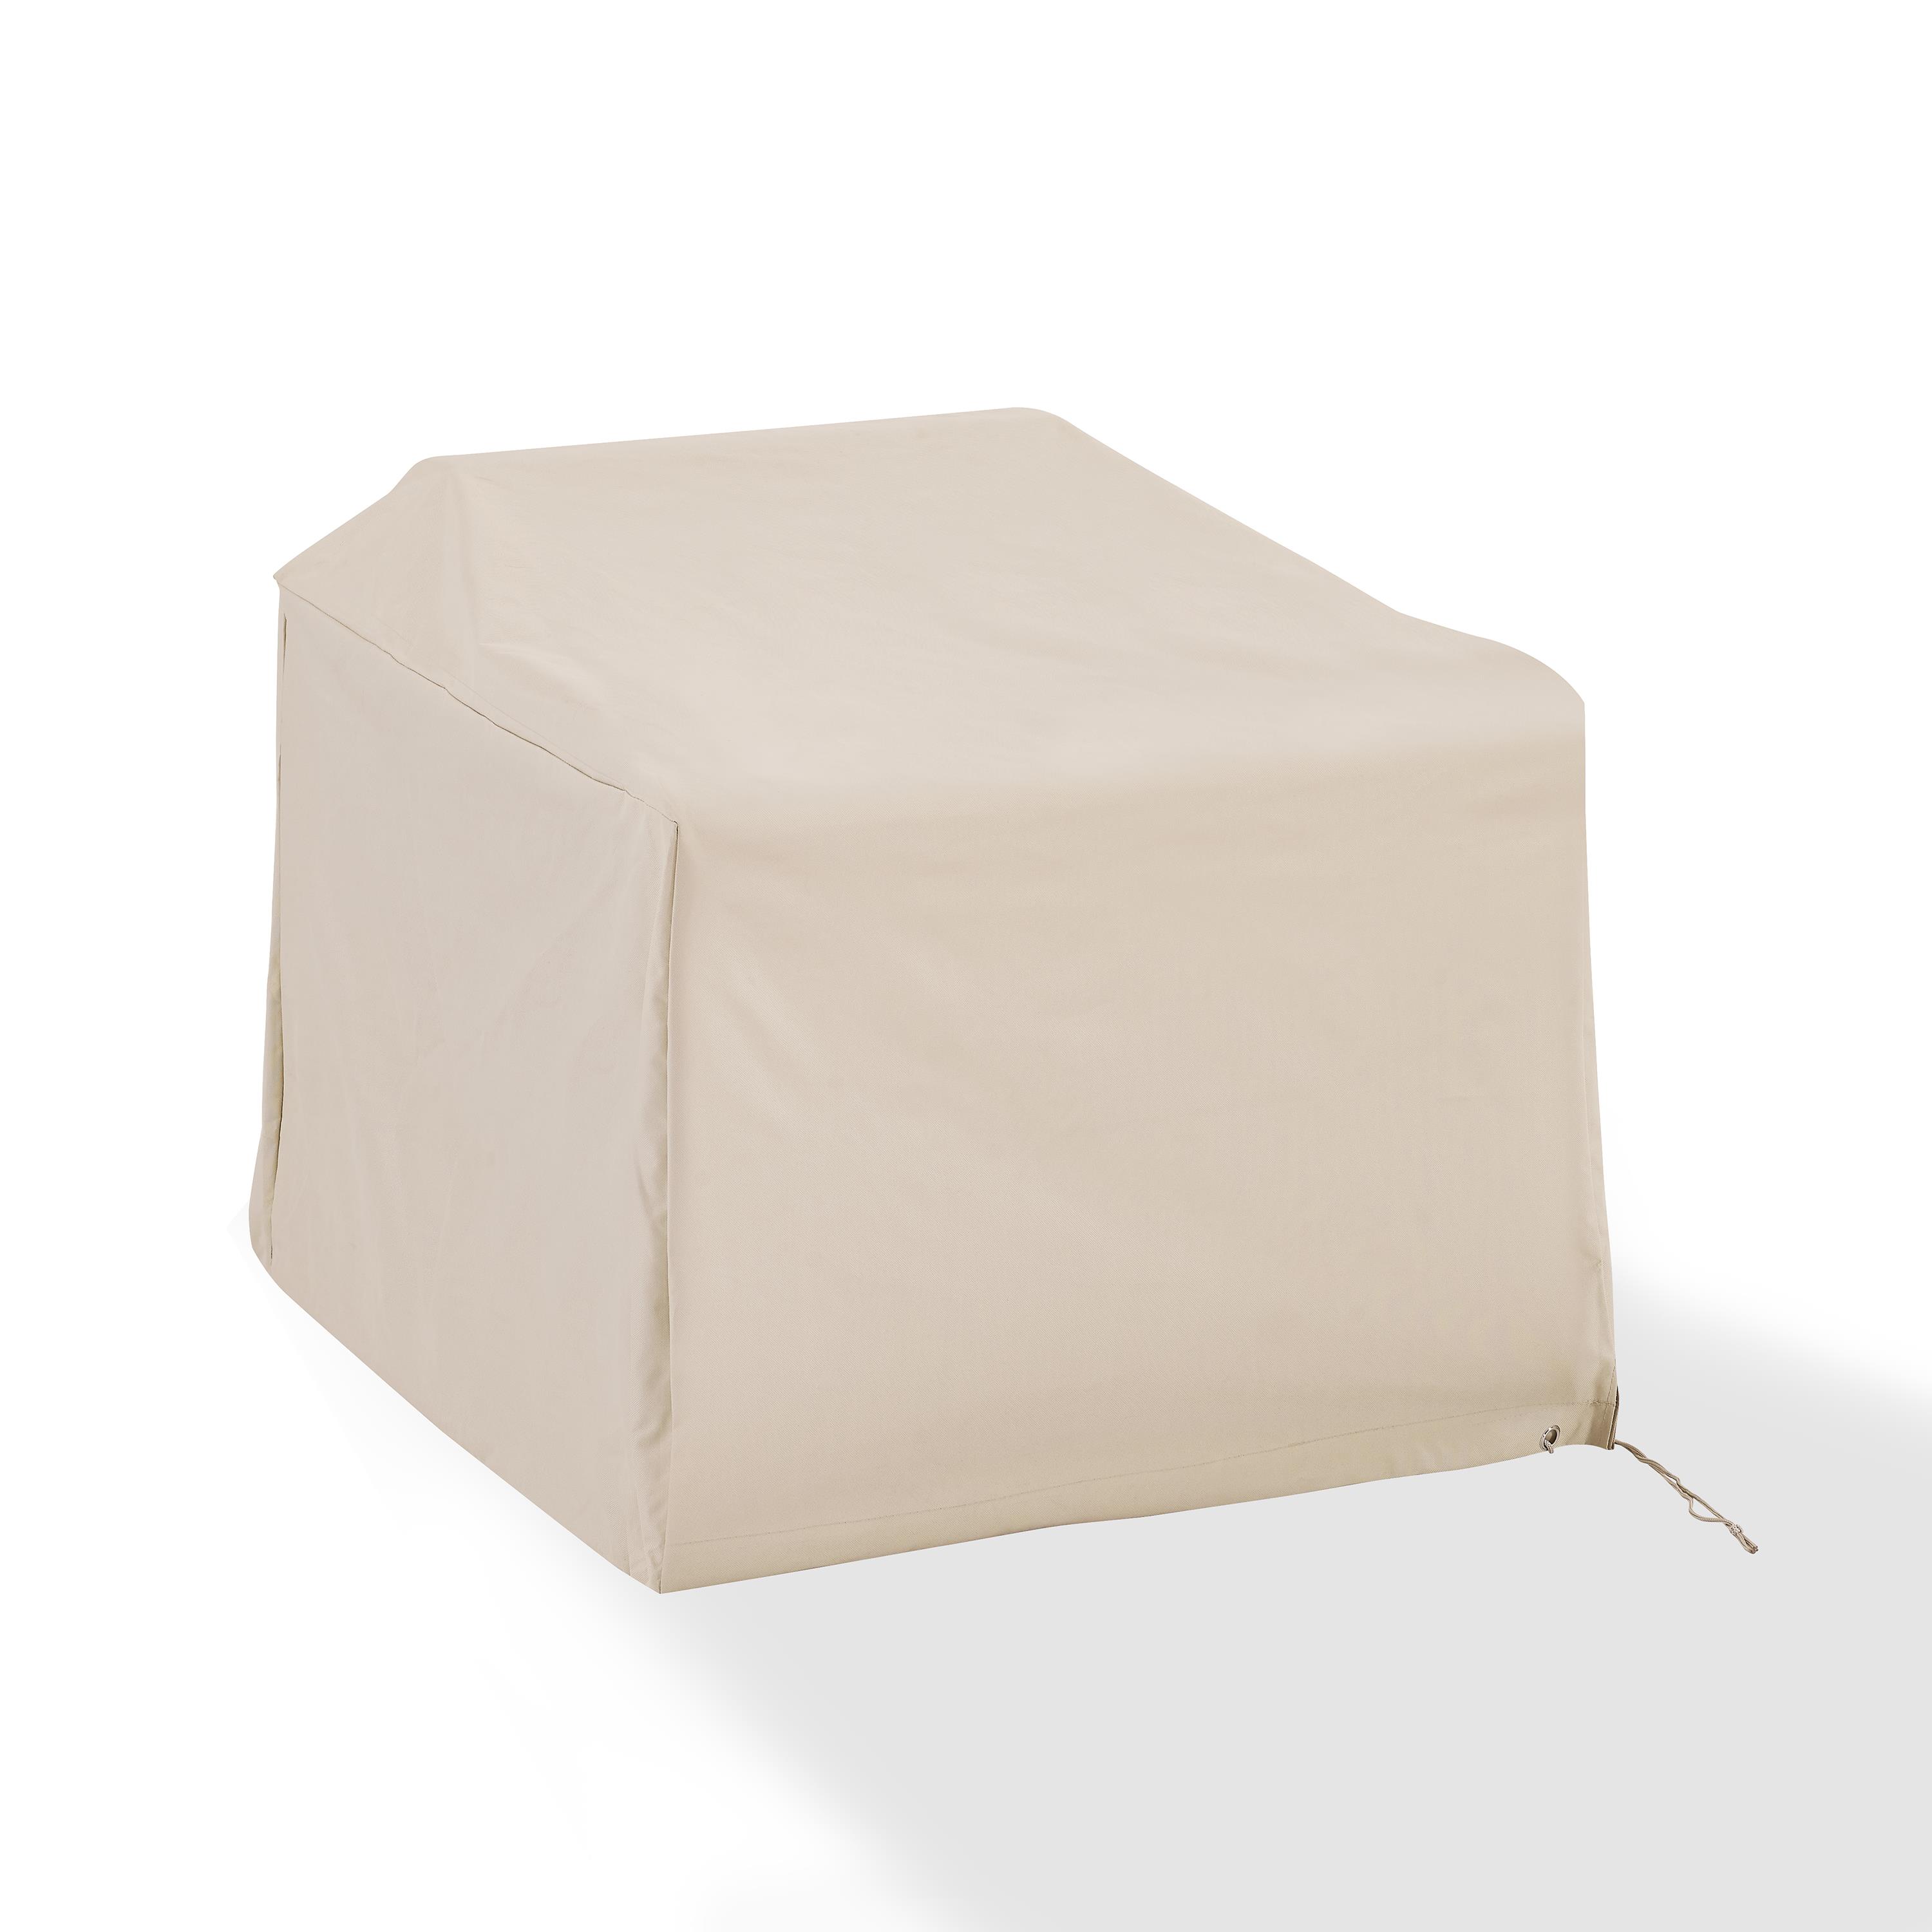 Crosley Furniture Outdoor Vinyl Chair Cover in Tan (Set of 2) - image 2 of 8